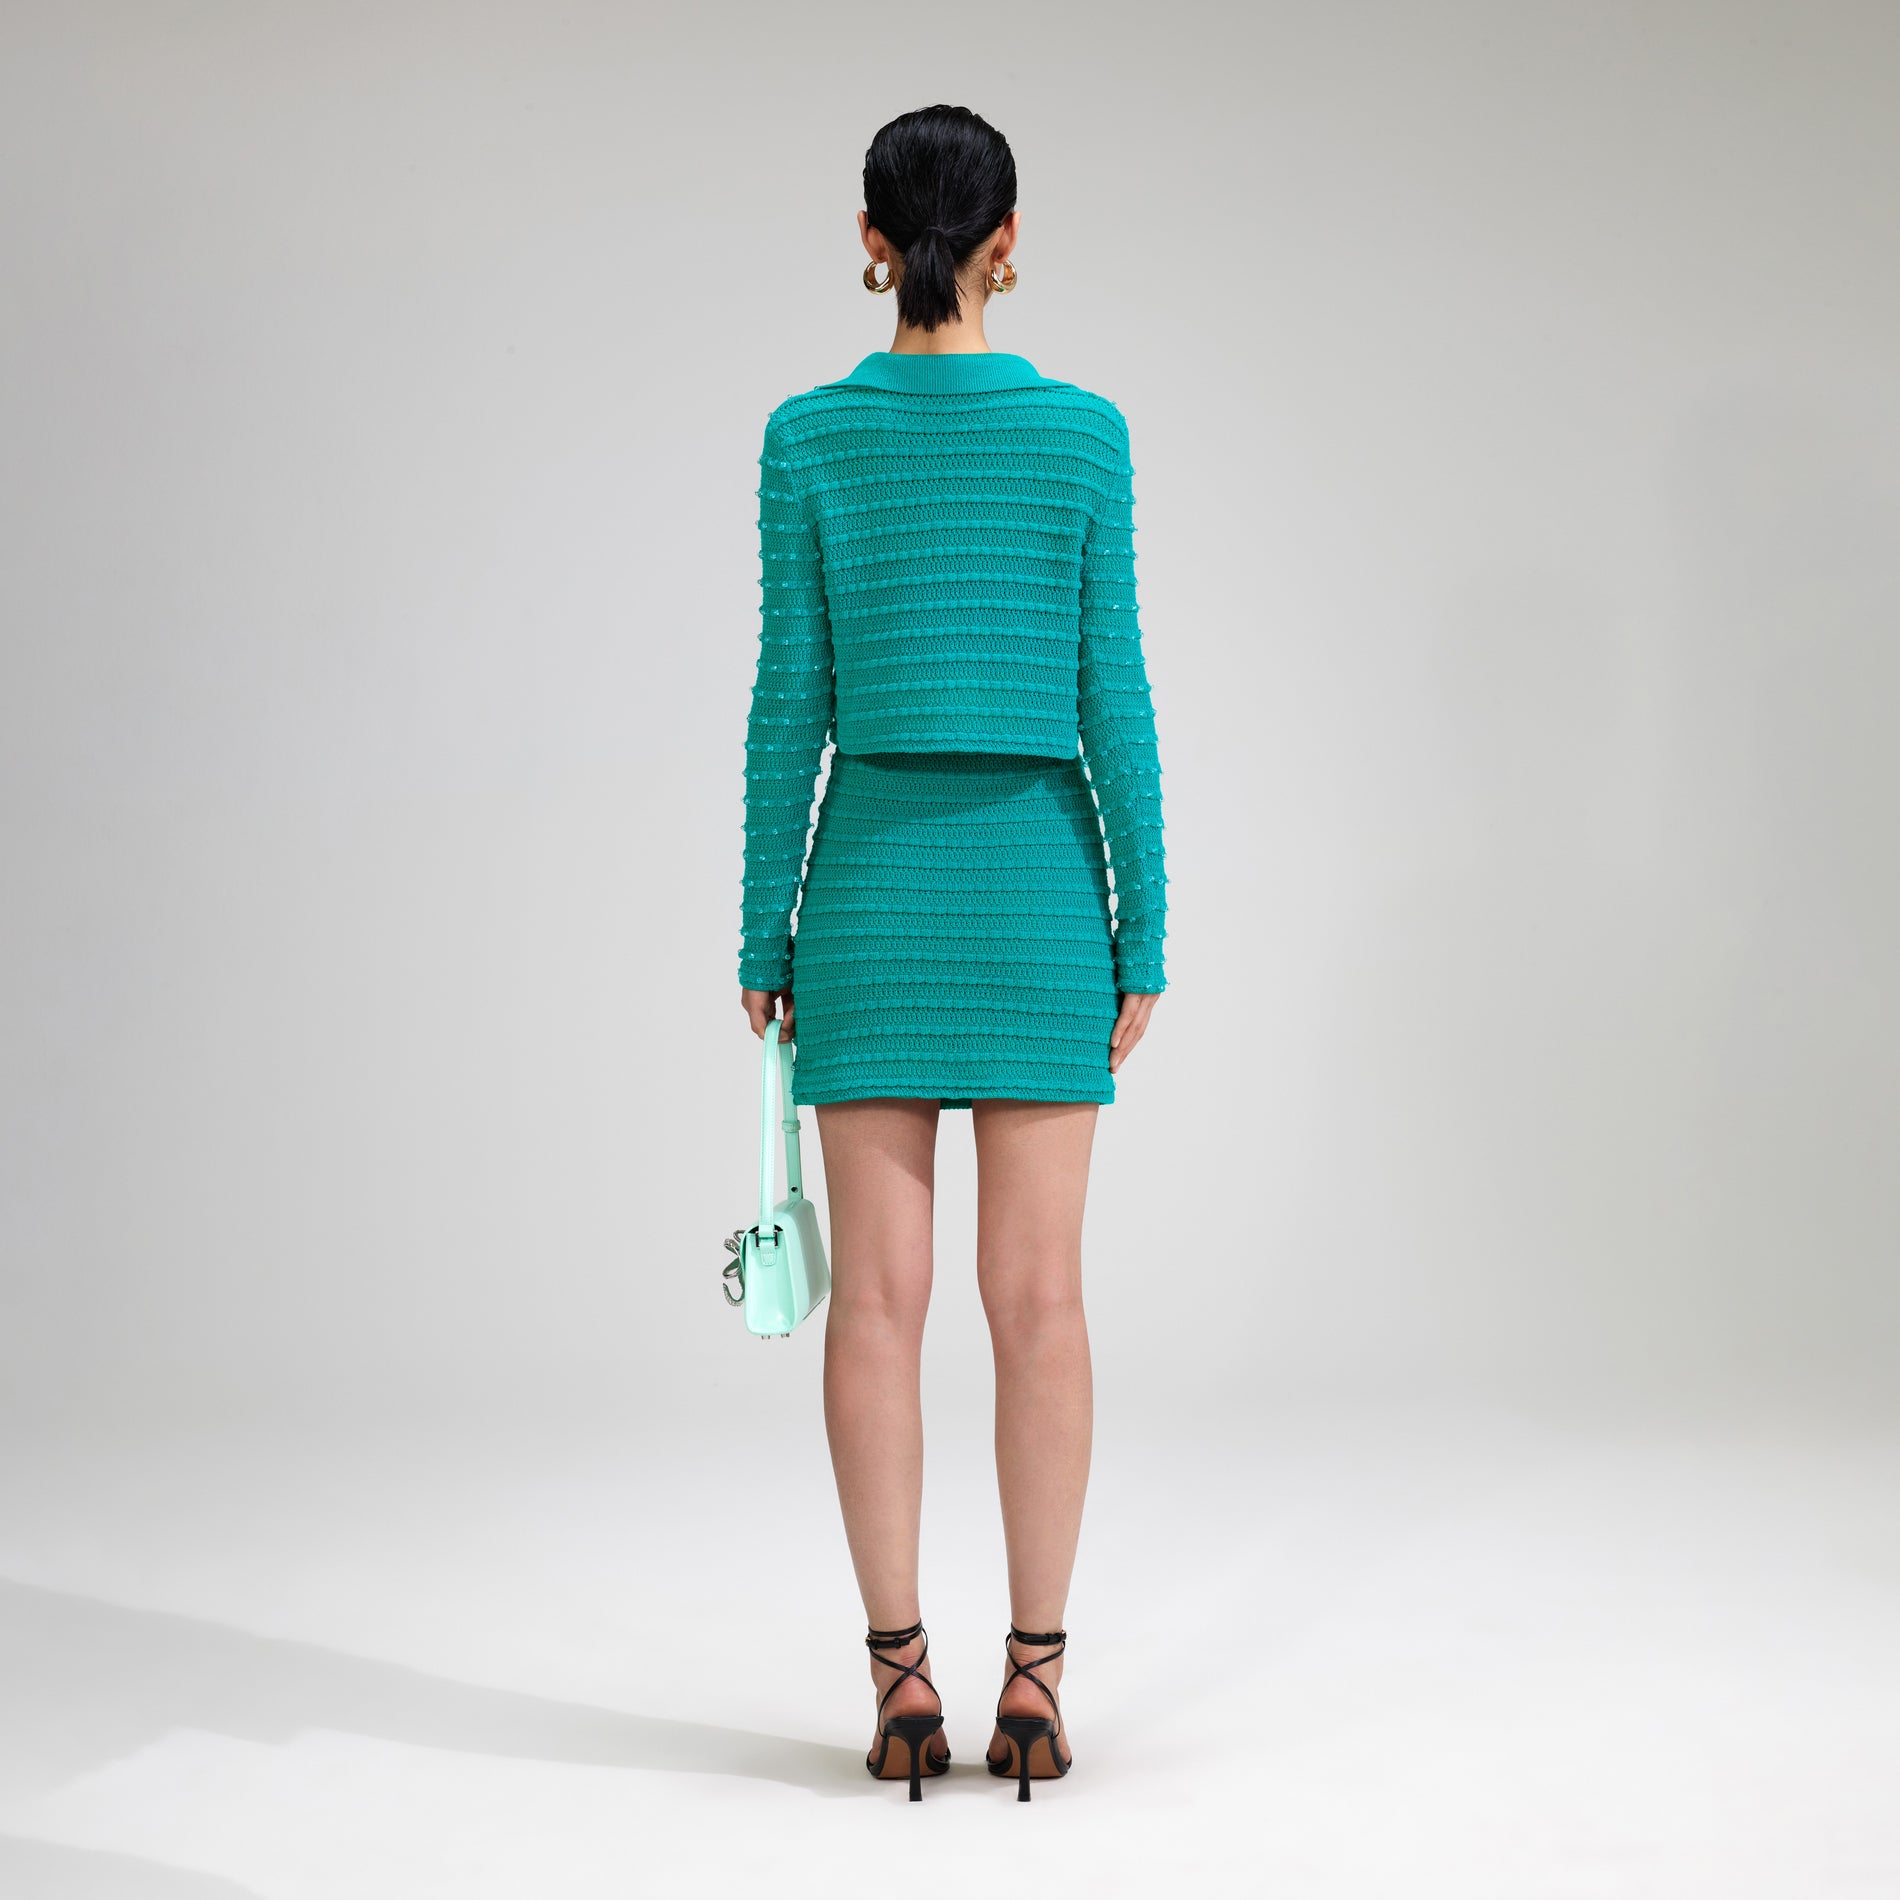 A woman wearing the Green Beaded Knit Mini Skirt